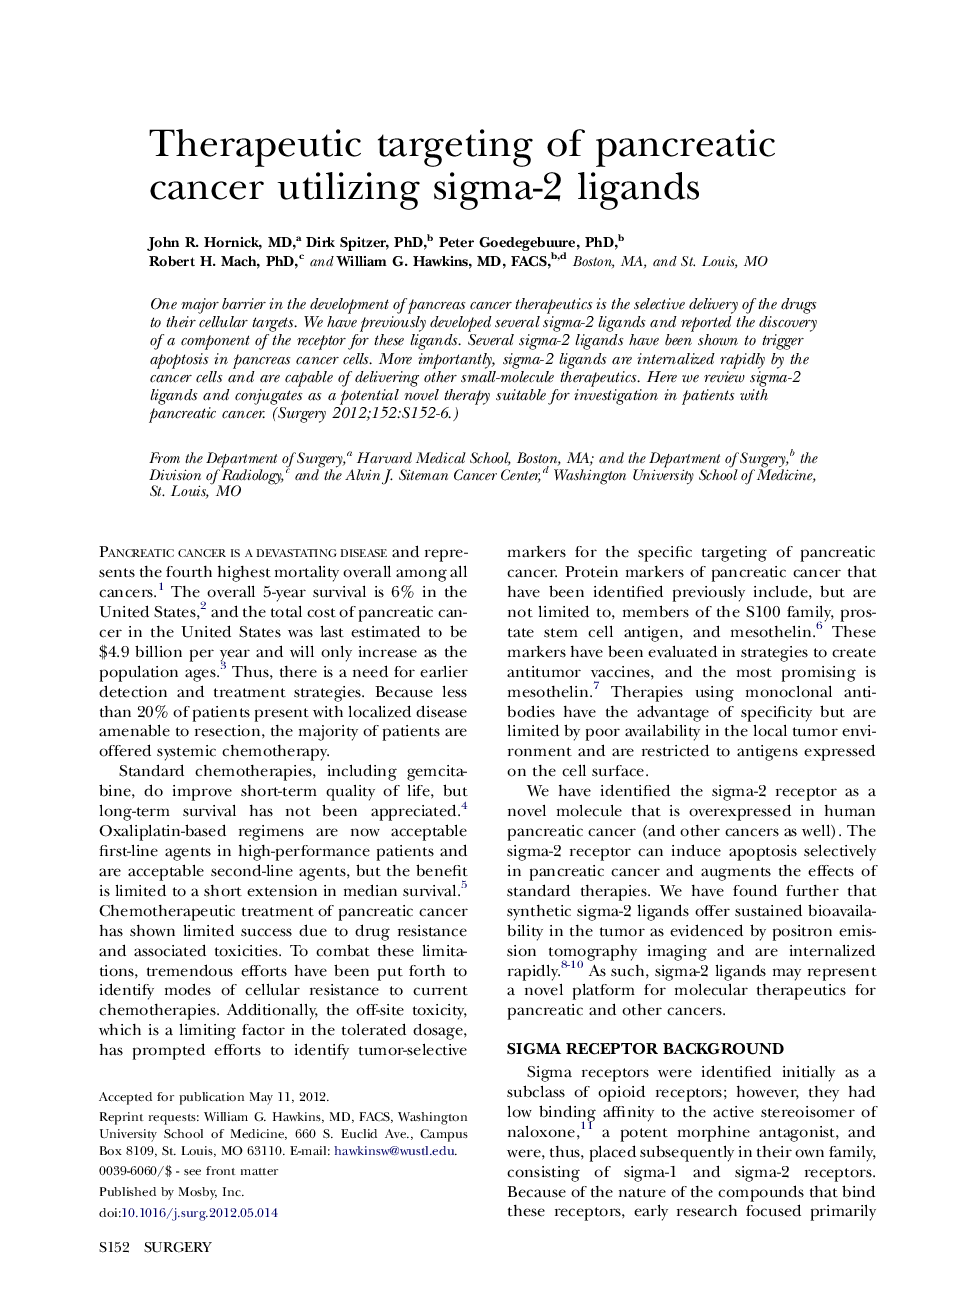 Therapeutic targeting of pancreatic cancer utilizing sigma-2 ligands